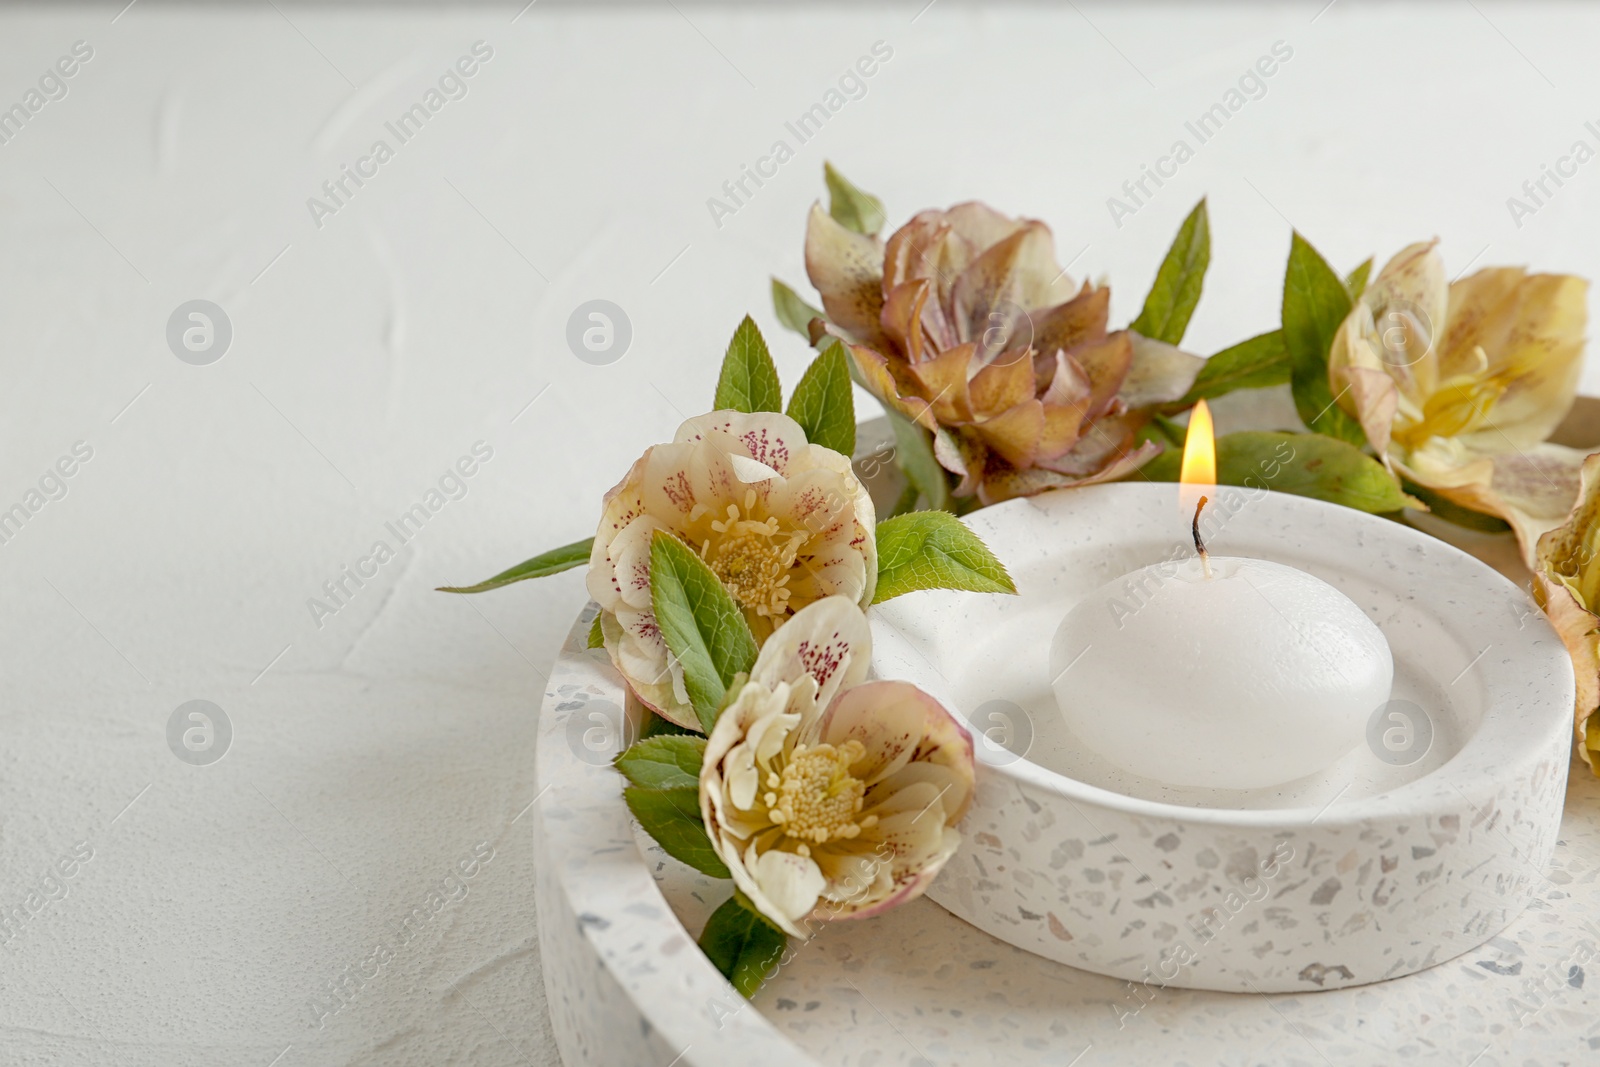 Photo of Stylish tender composition with burning candle and flowers on tray, space for text. Cozy interior element